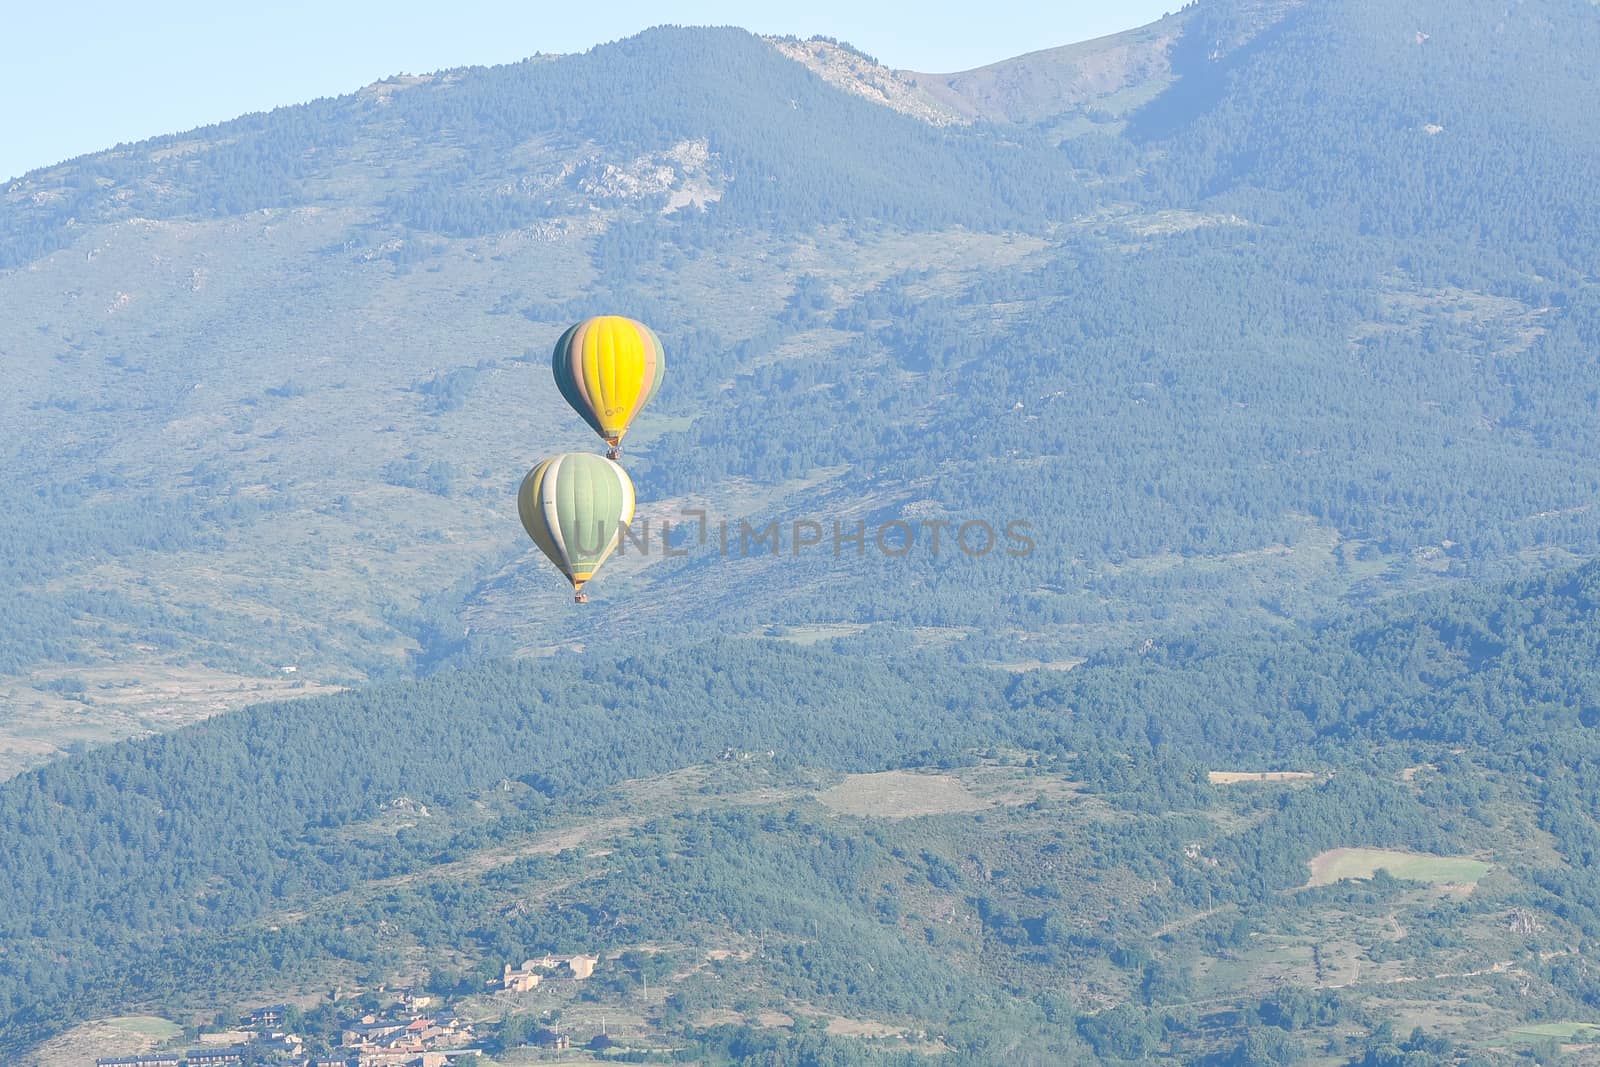 Colorful hot air balloons flying over the mountain in Puig Cerda by martinscphoto